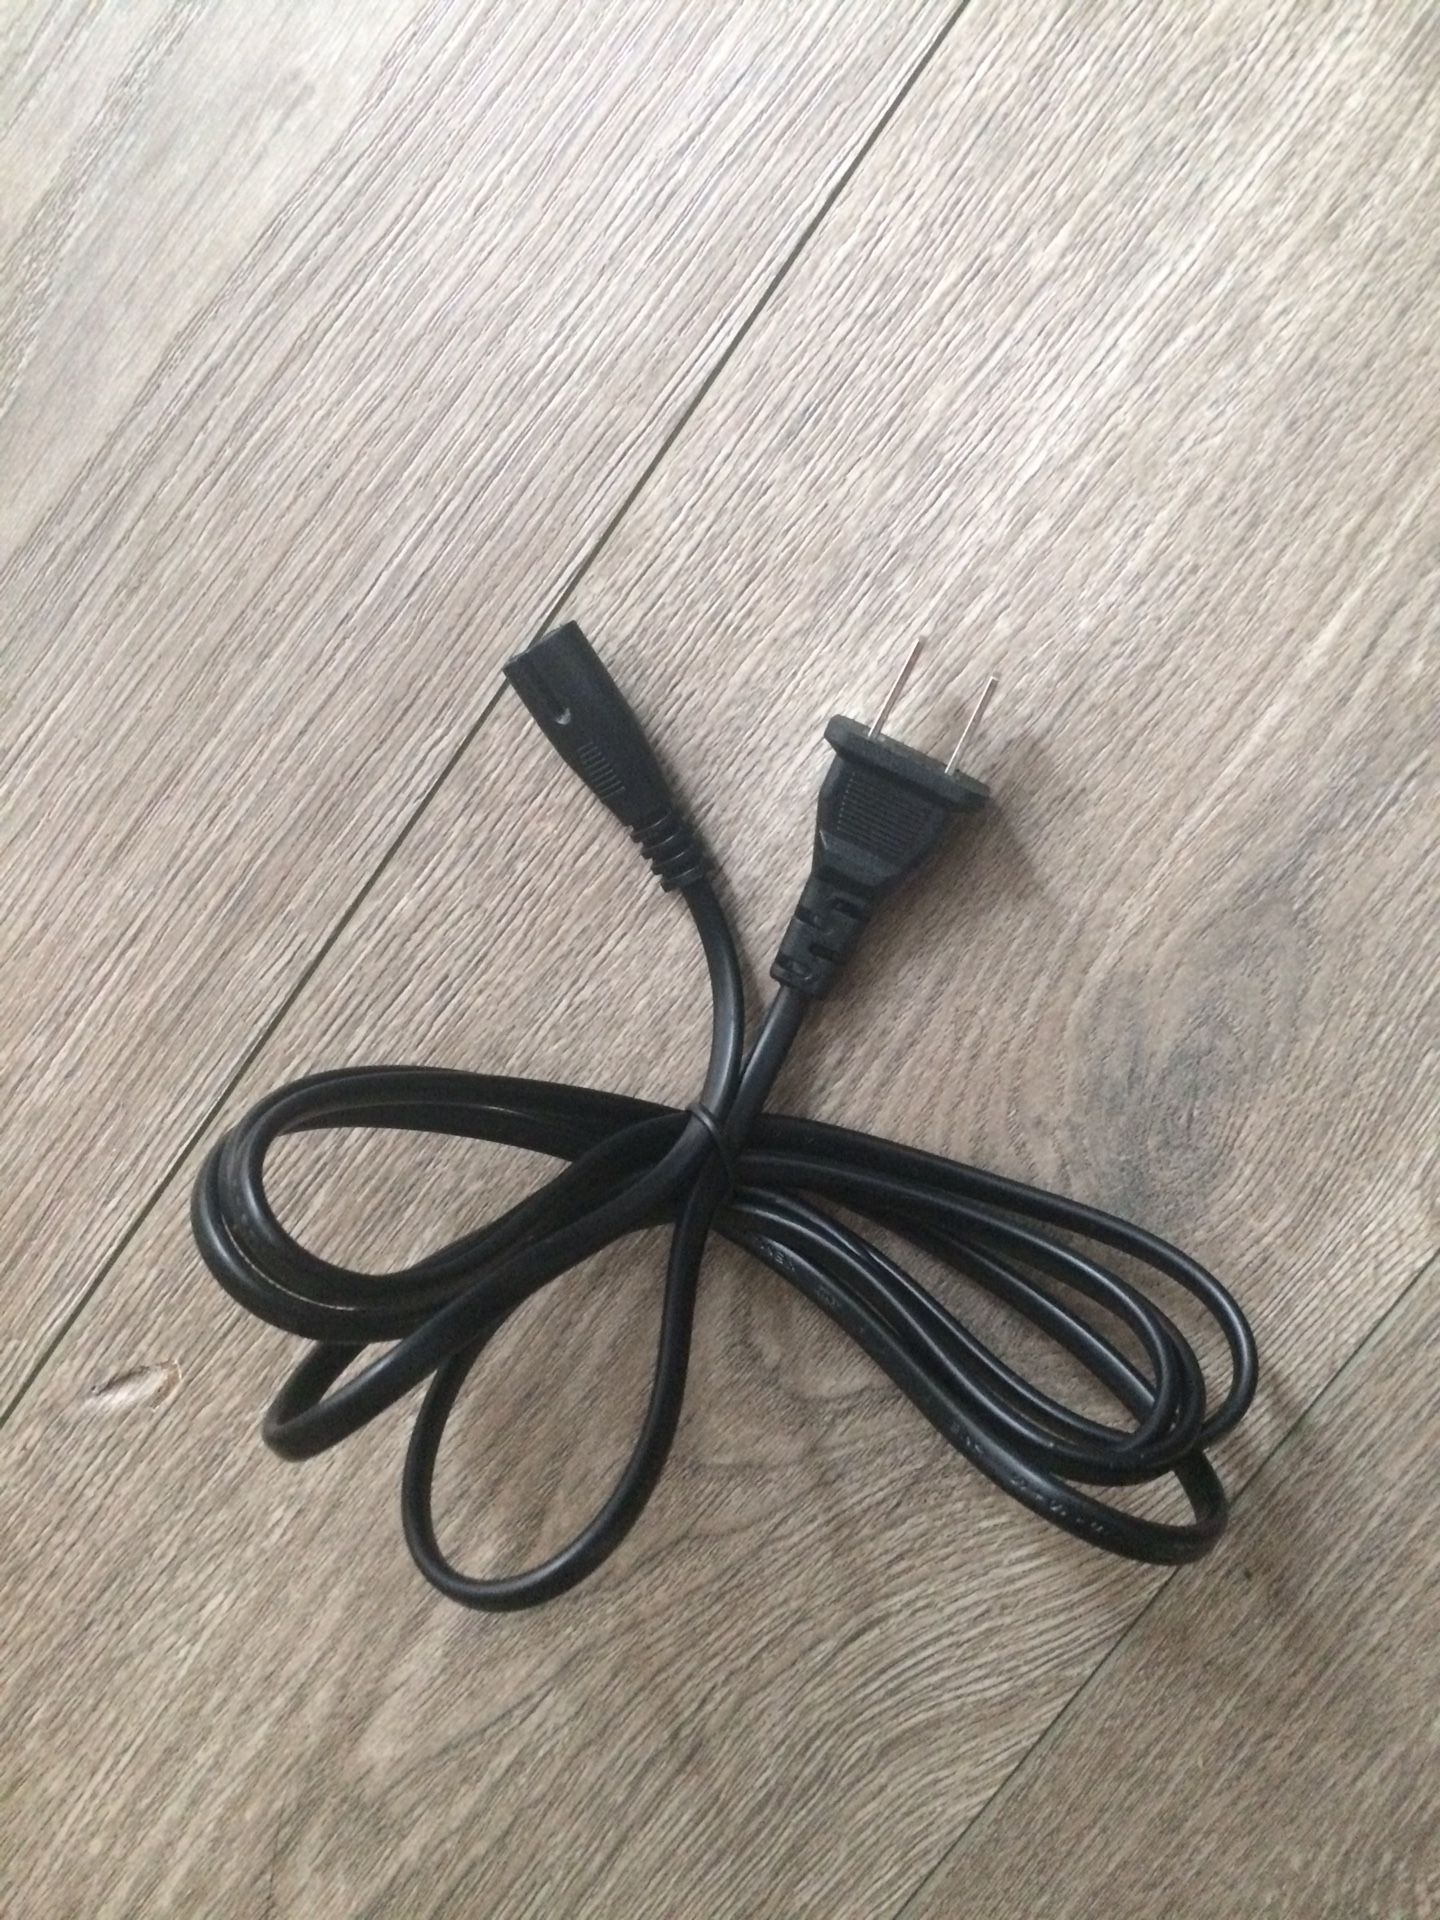 Ps4 power cord